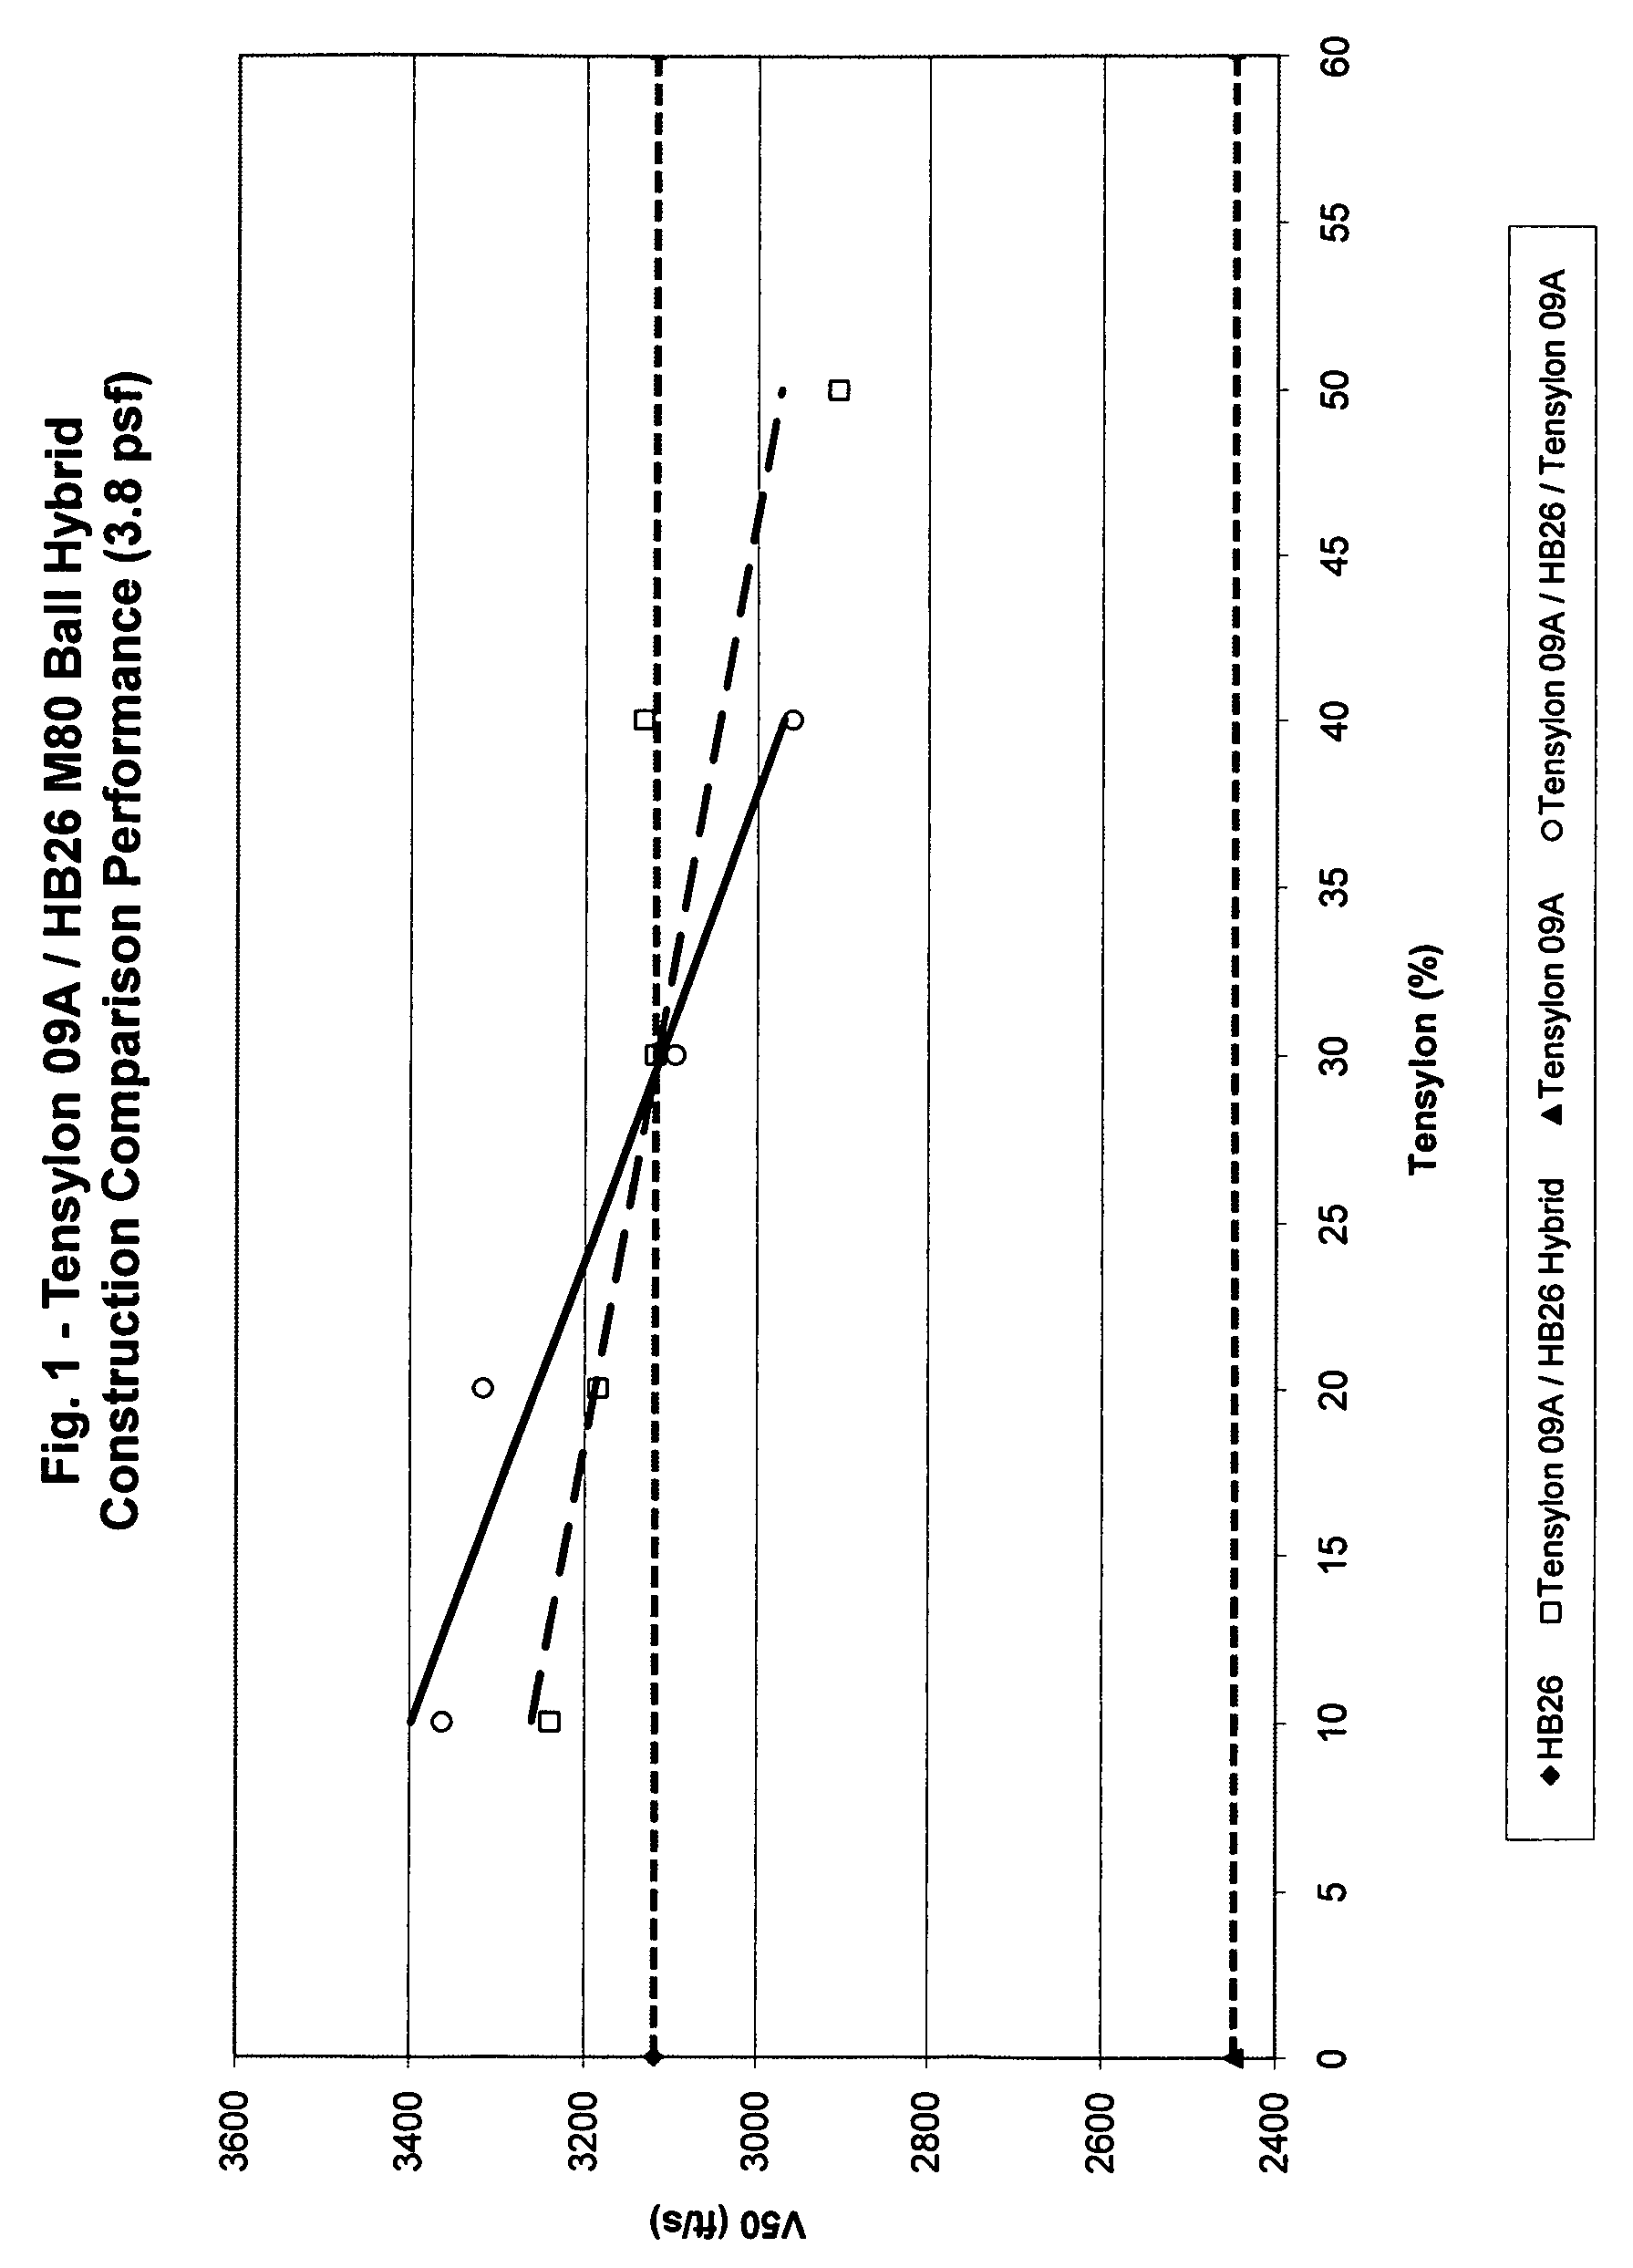 Ballistic-resistant article including one or more layers of cross-plied uhmwpe tape in combination with cross-plied fibers